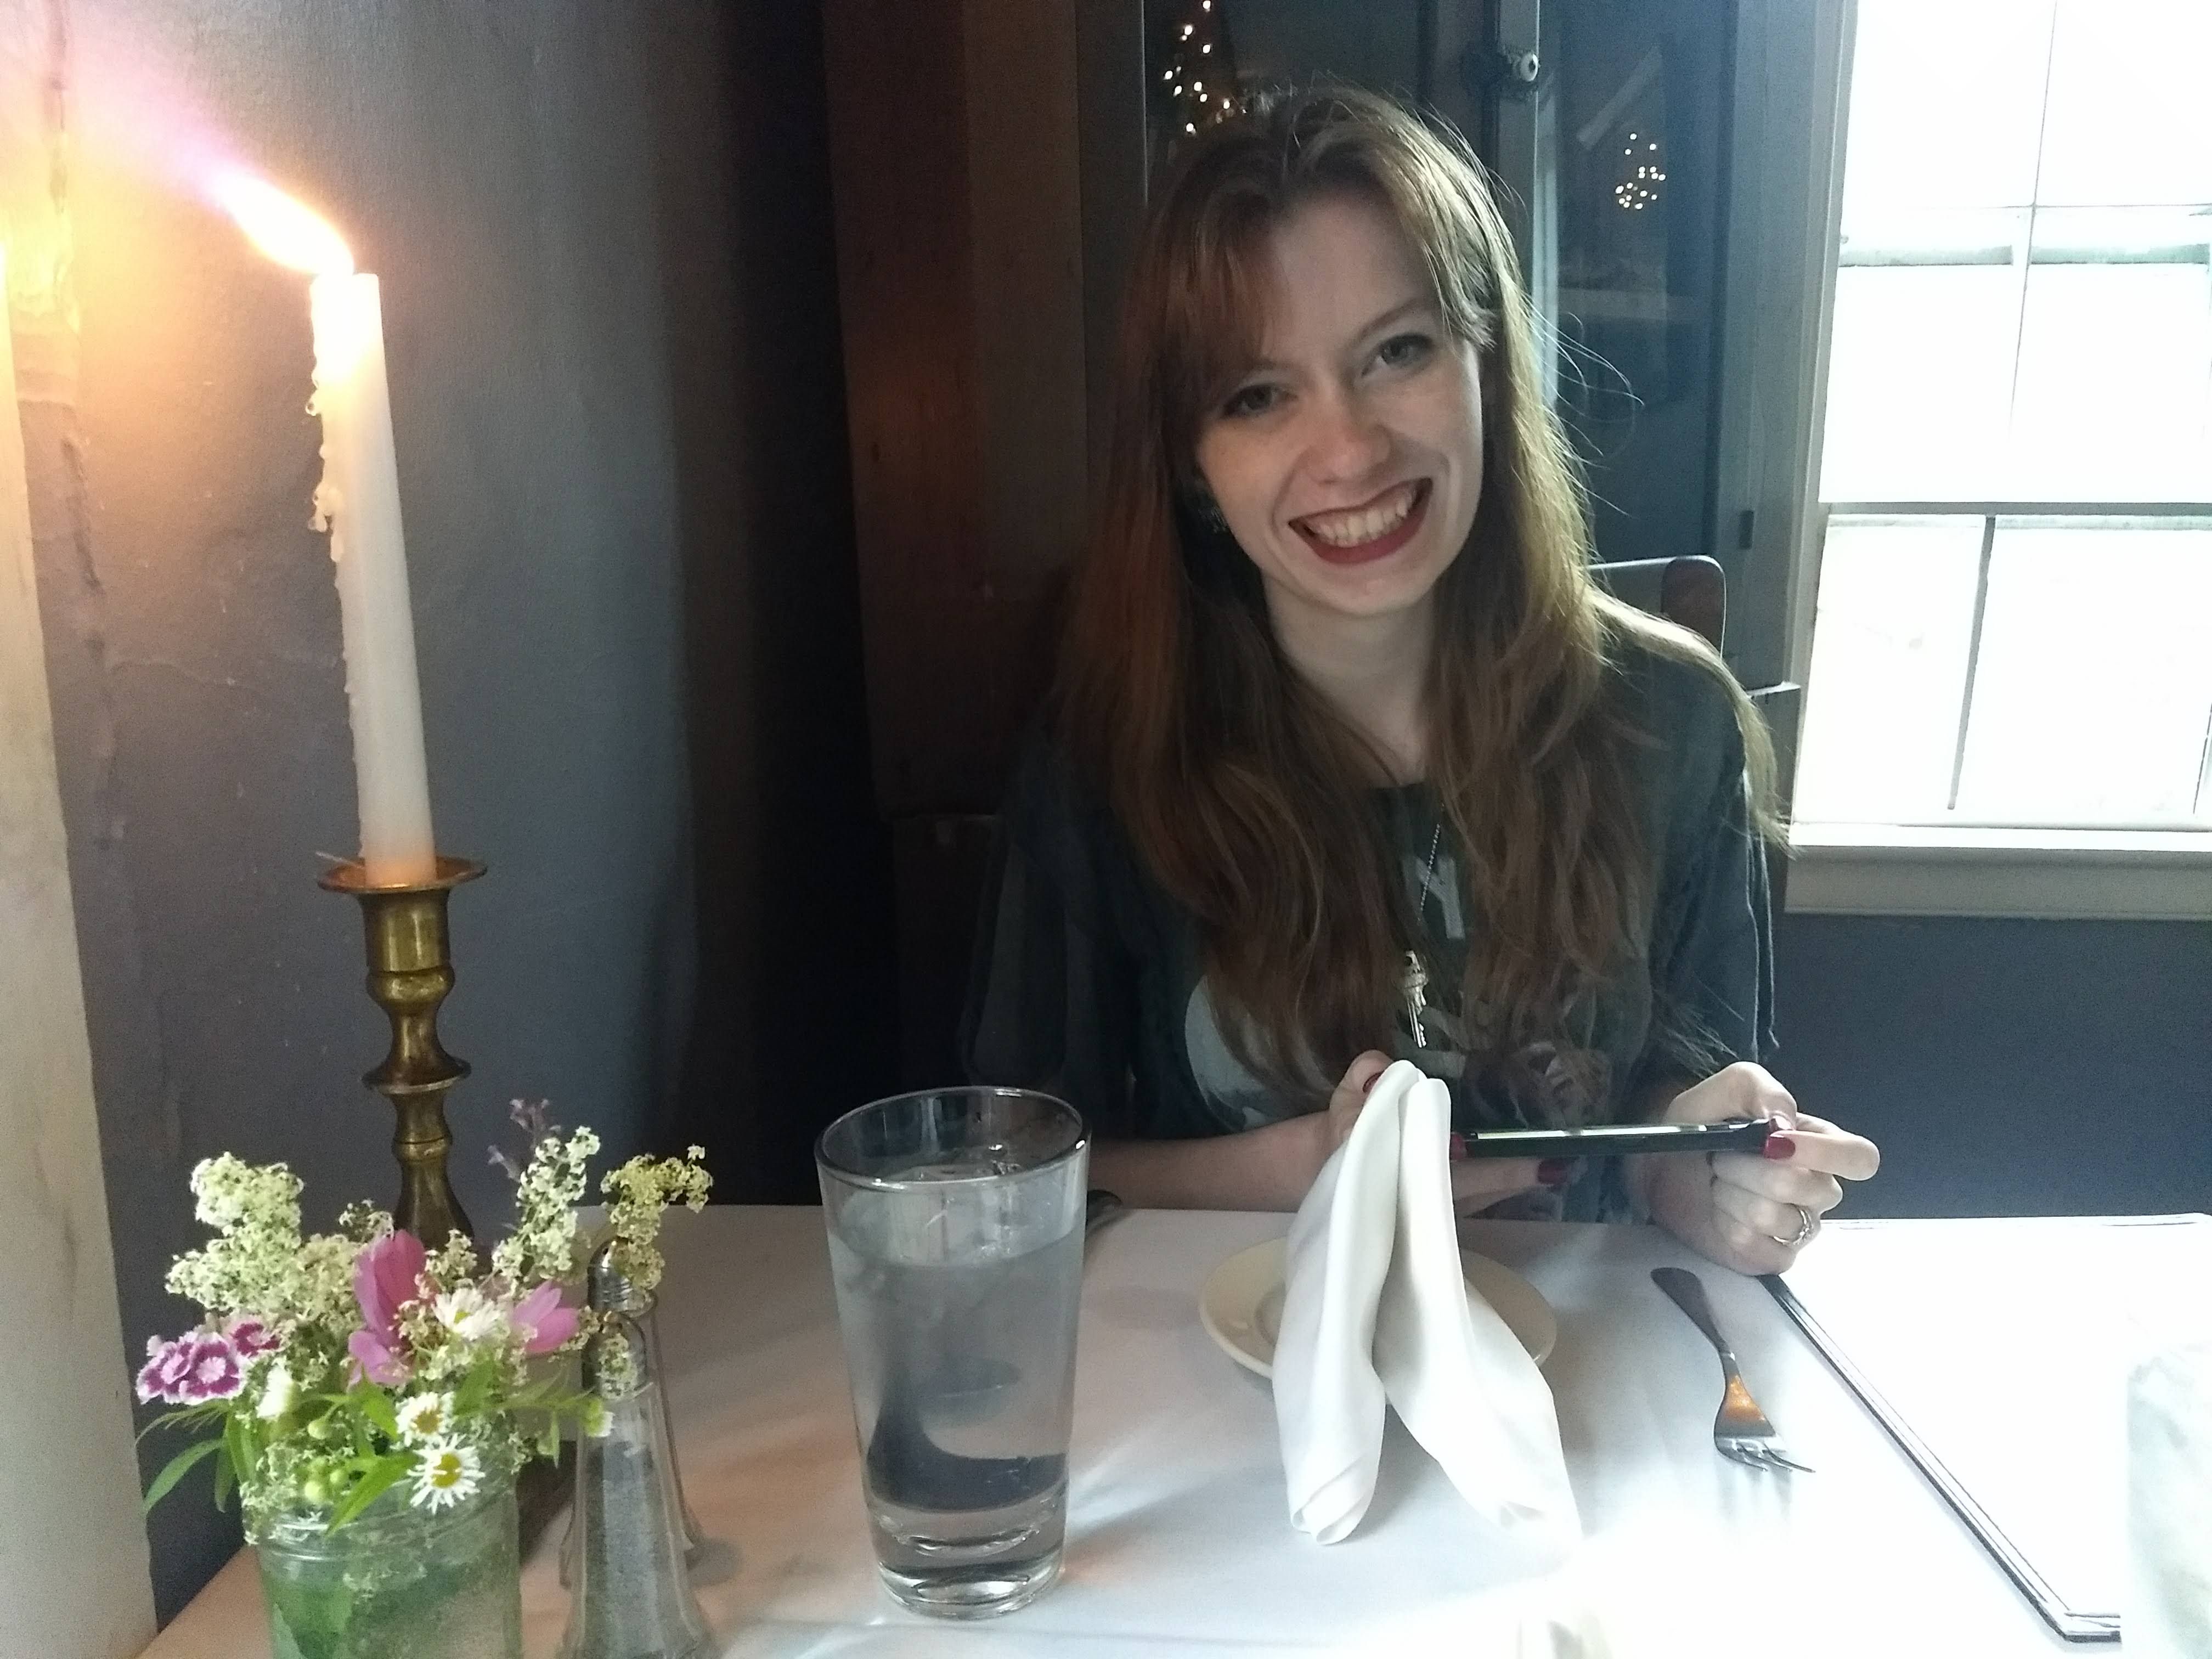 My beautiful dining companion and patient photo model.